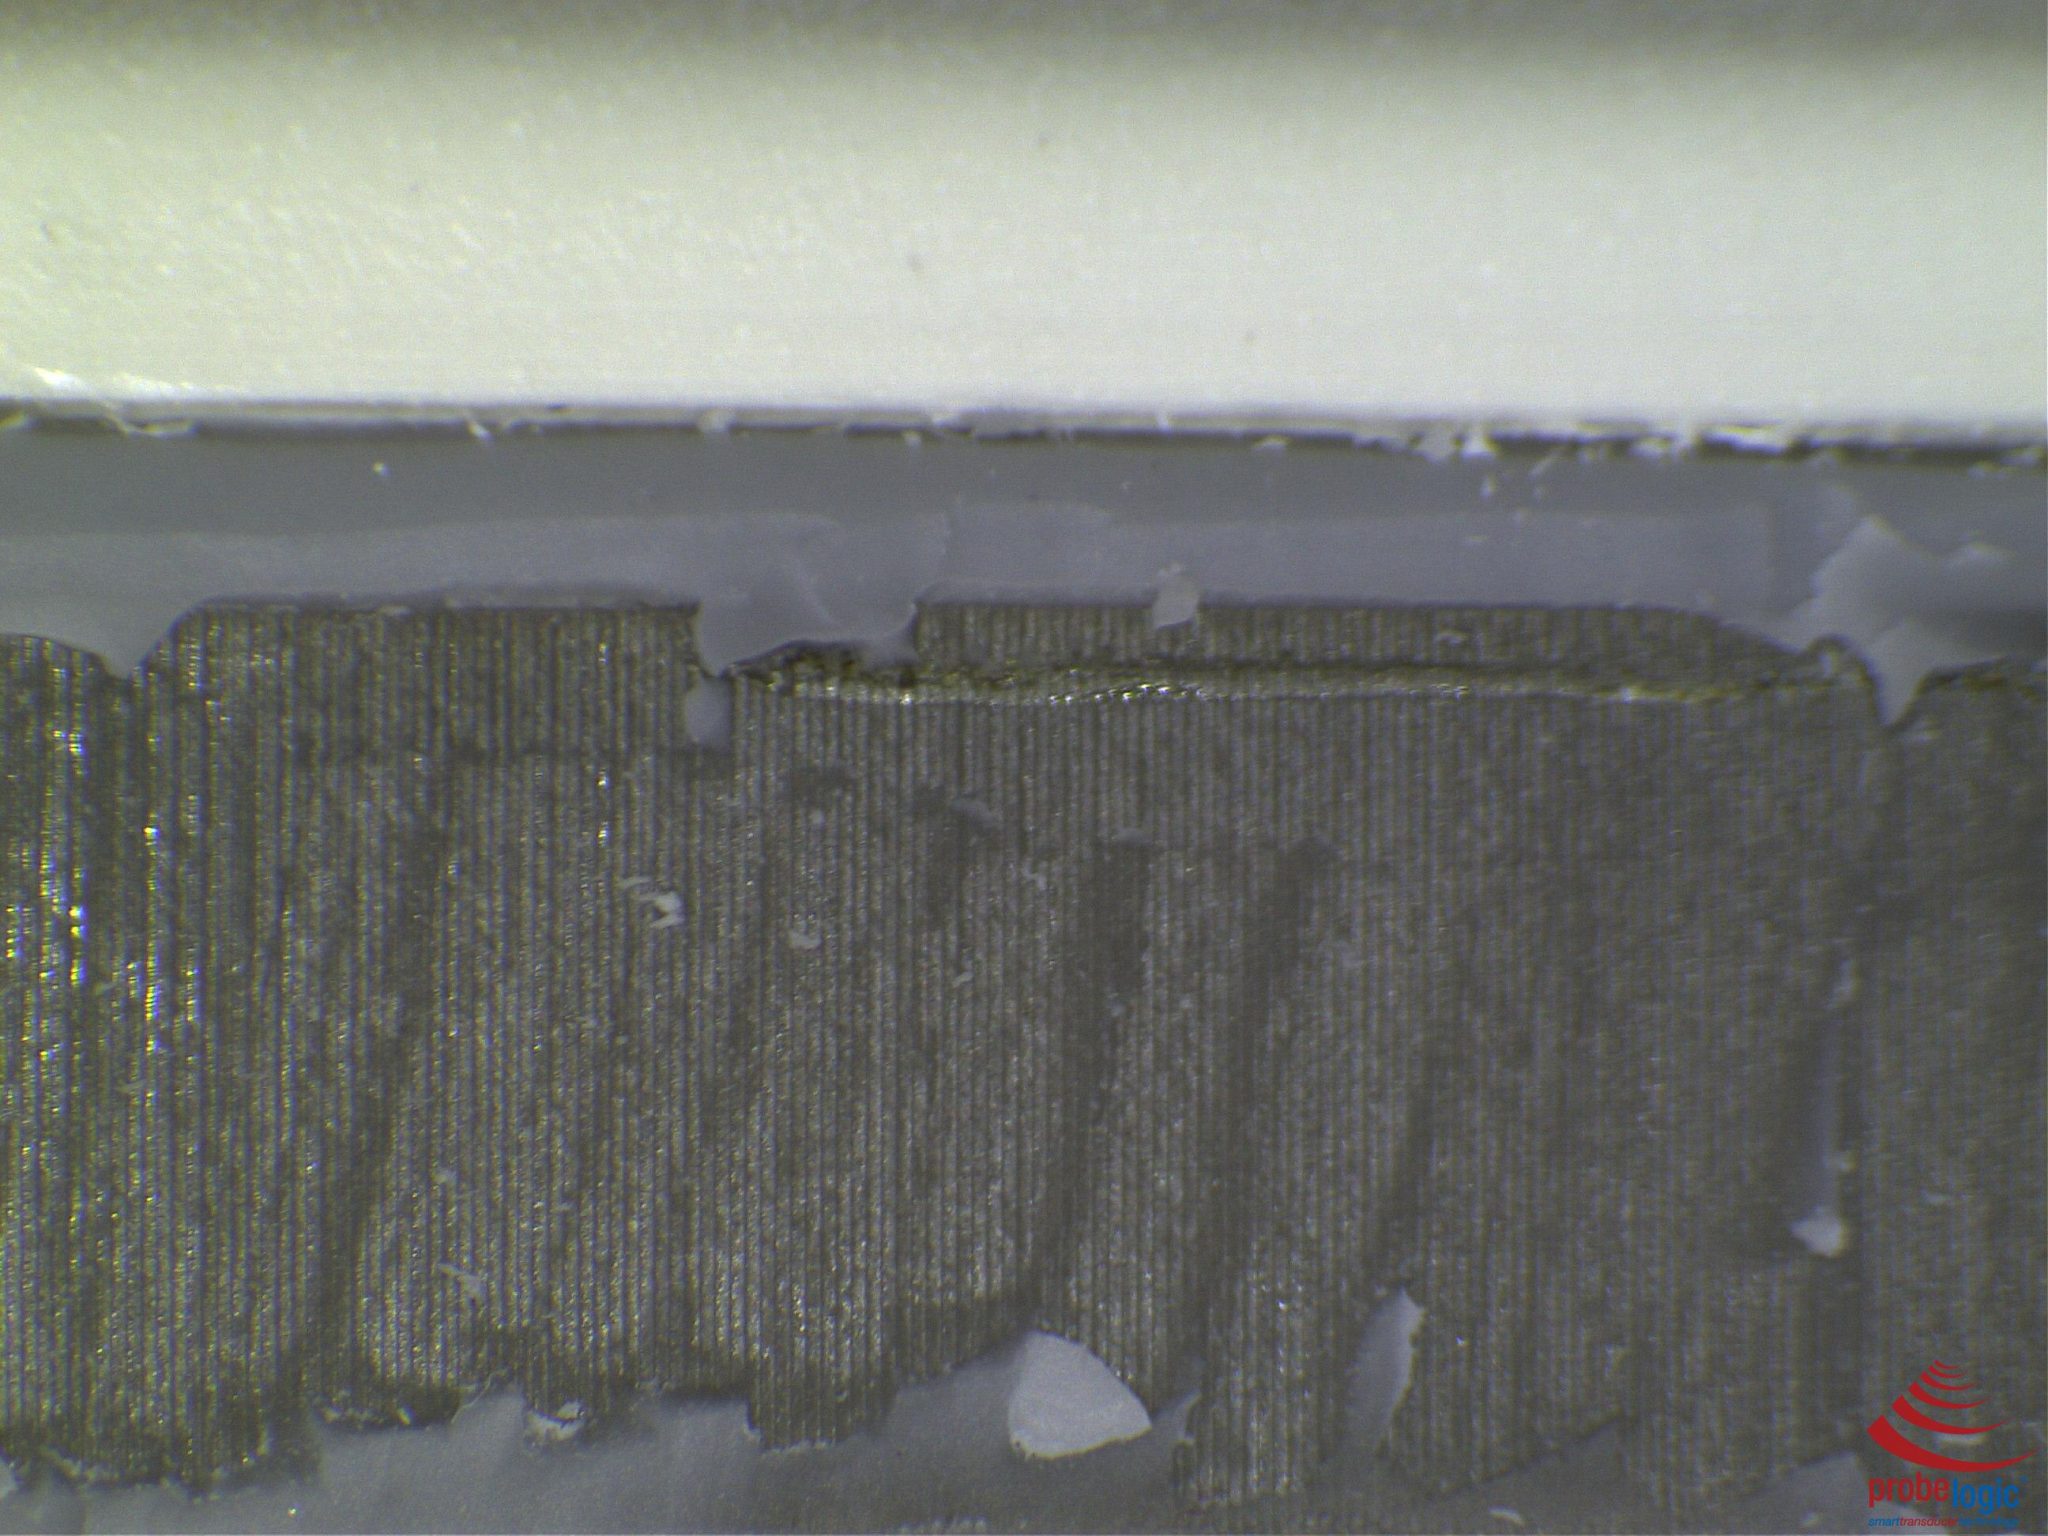 What does a cracked acoustic array look like under a microscope?